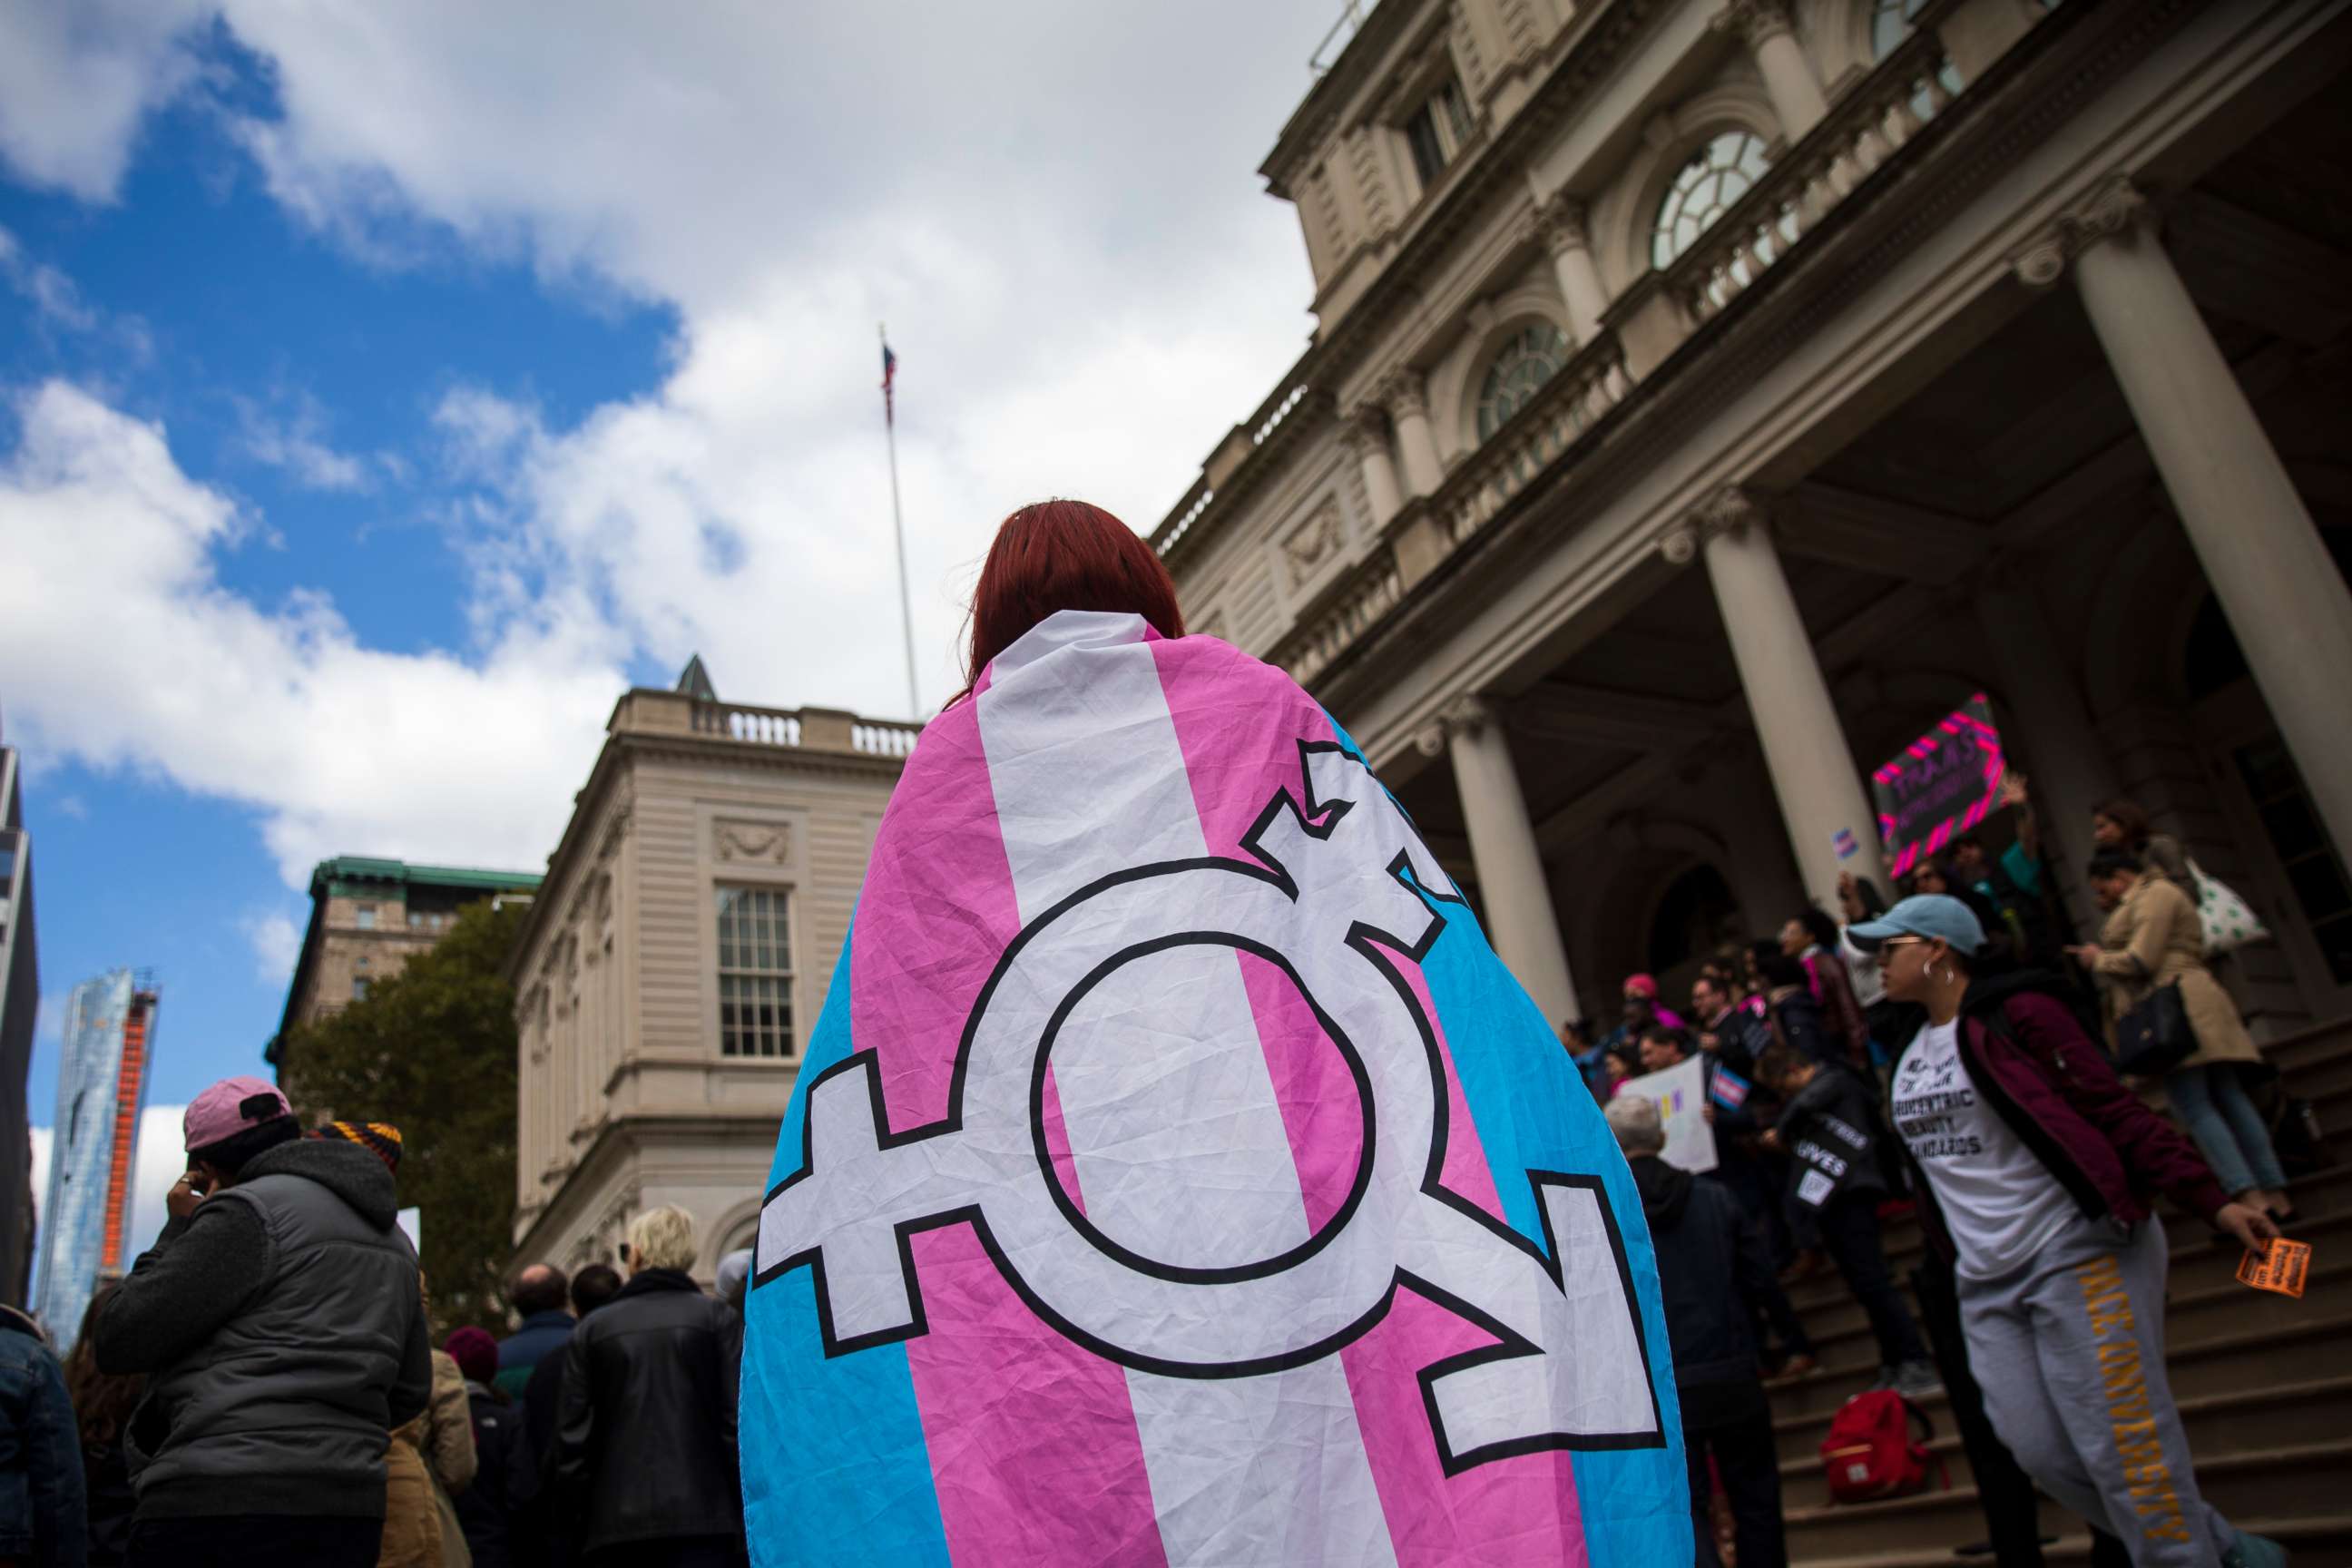 PHOTO: LGBT activists and their supporters rally in support of transgender people on the steps of New York City Hall, Oct. 24, 2018 in New York City.